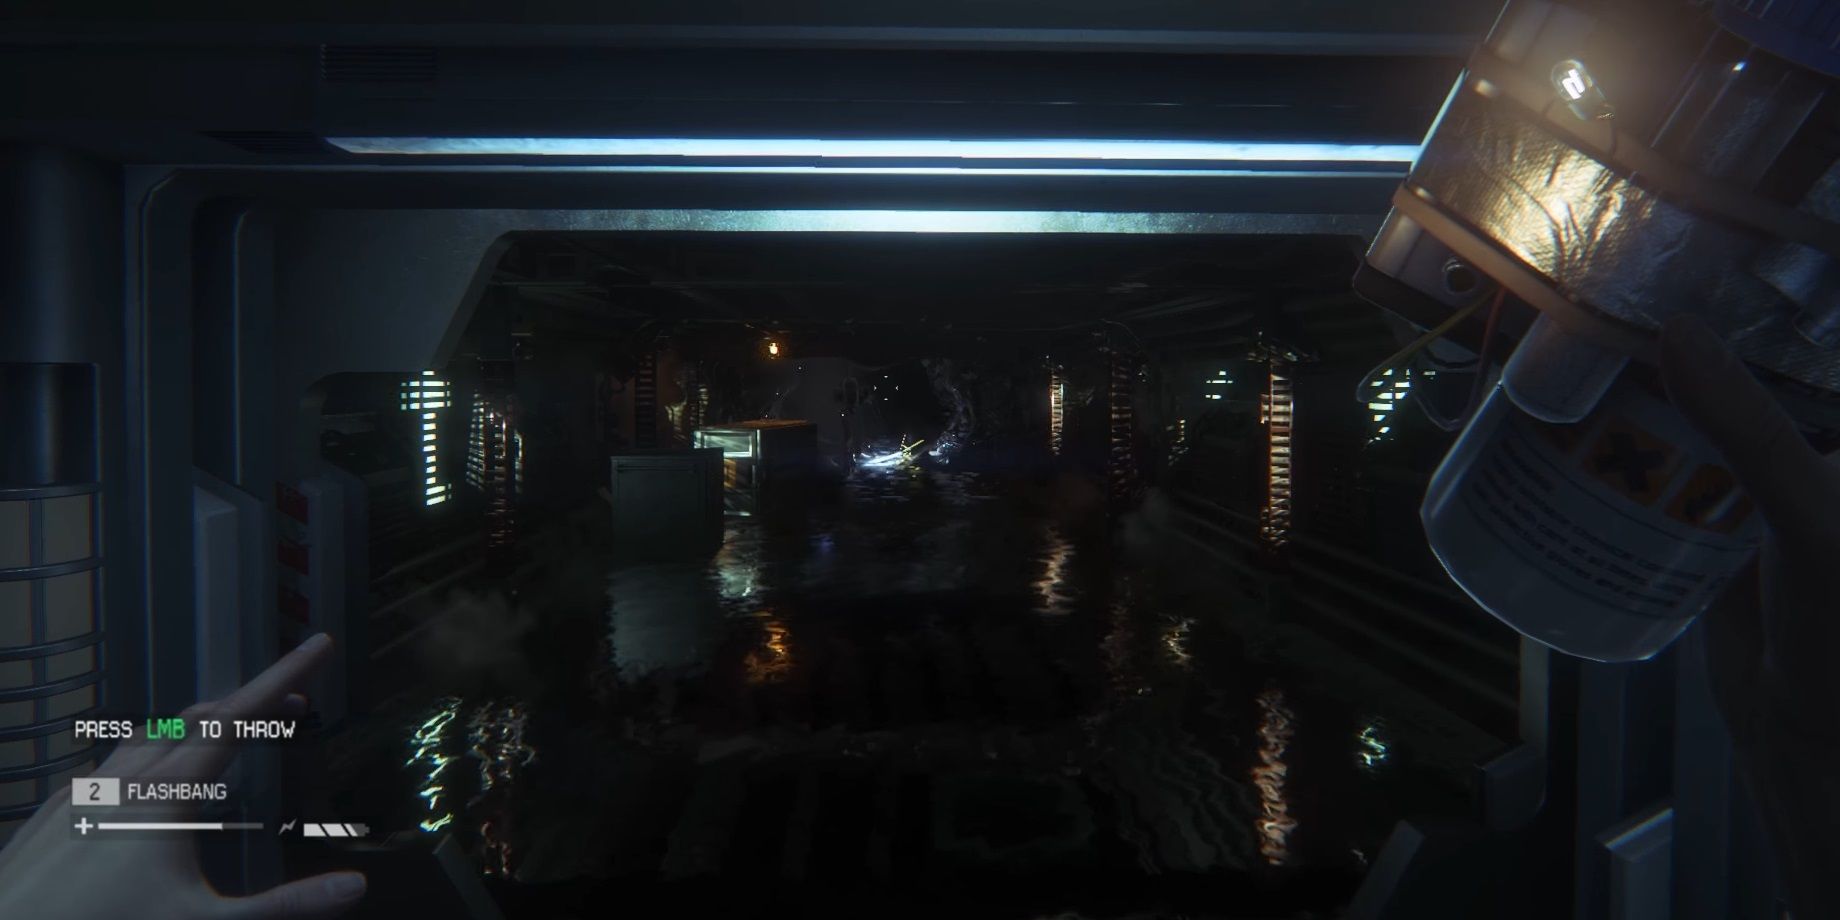 Alien Isolation - Flashbang being used on the Xenomorph